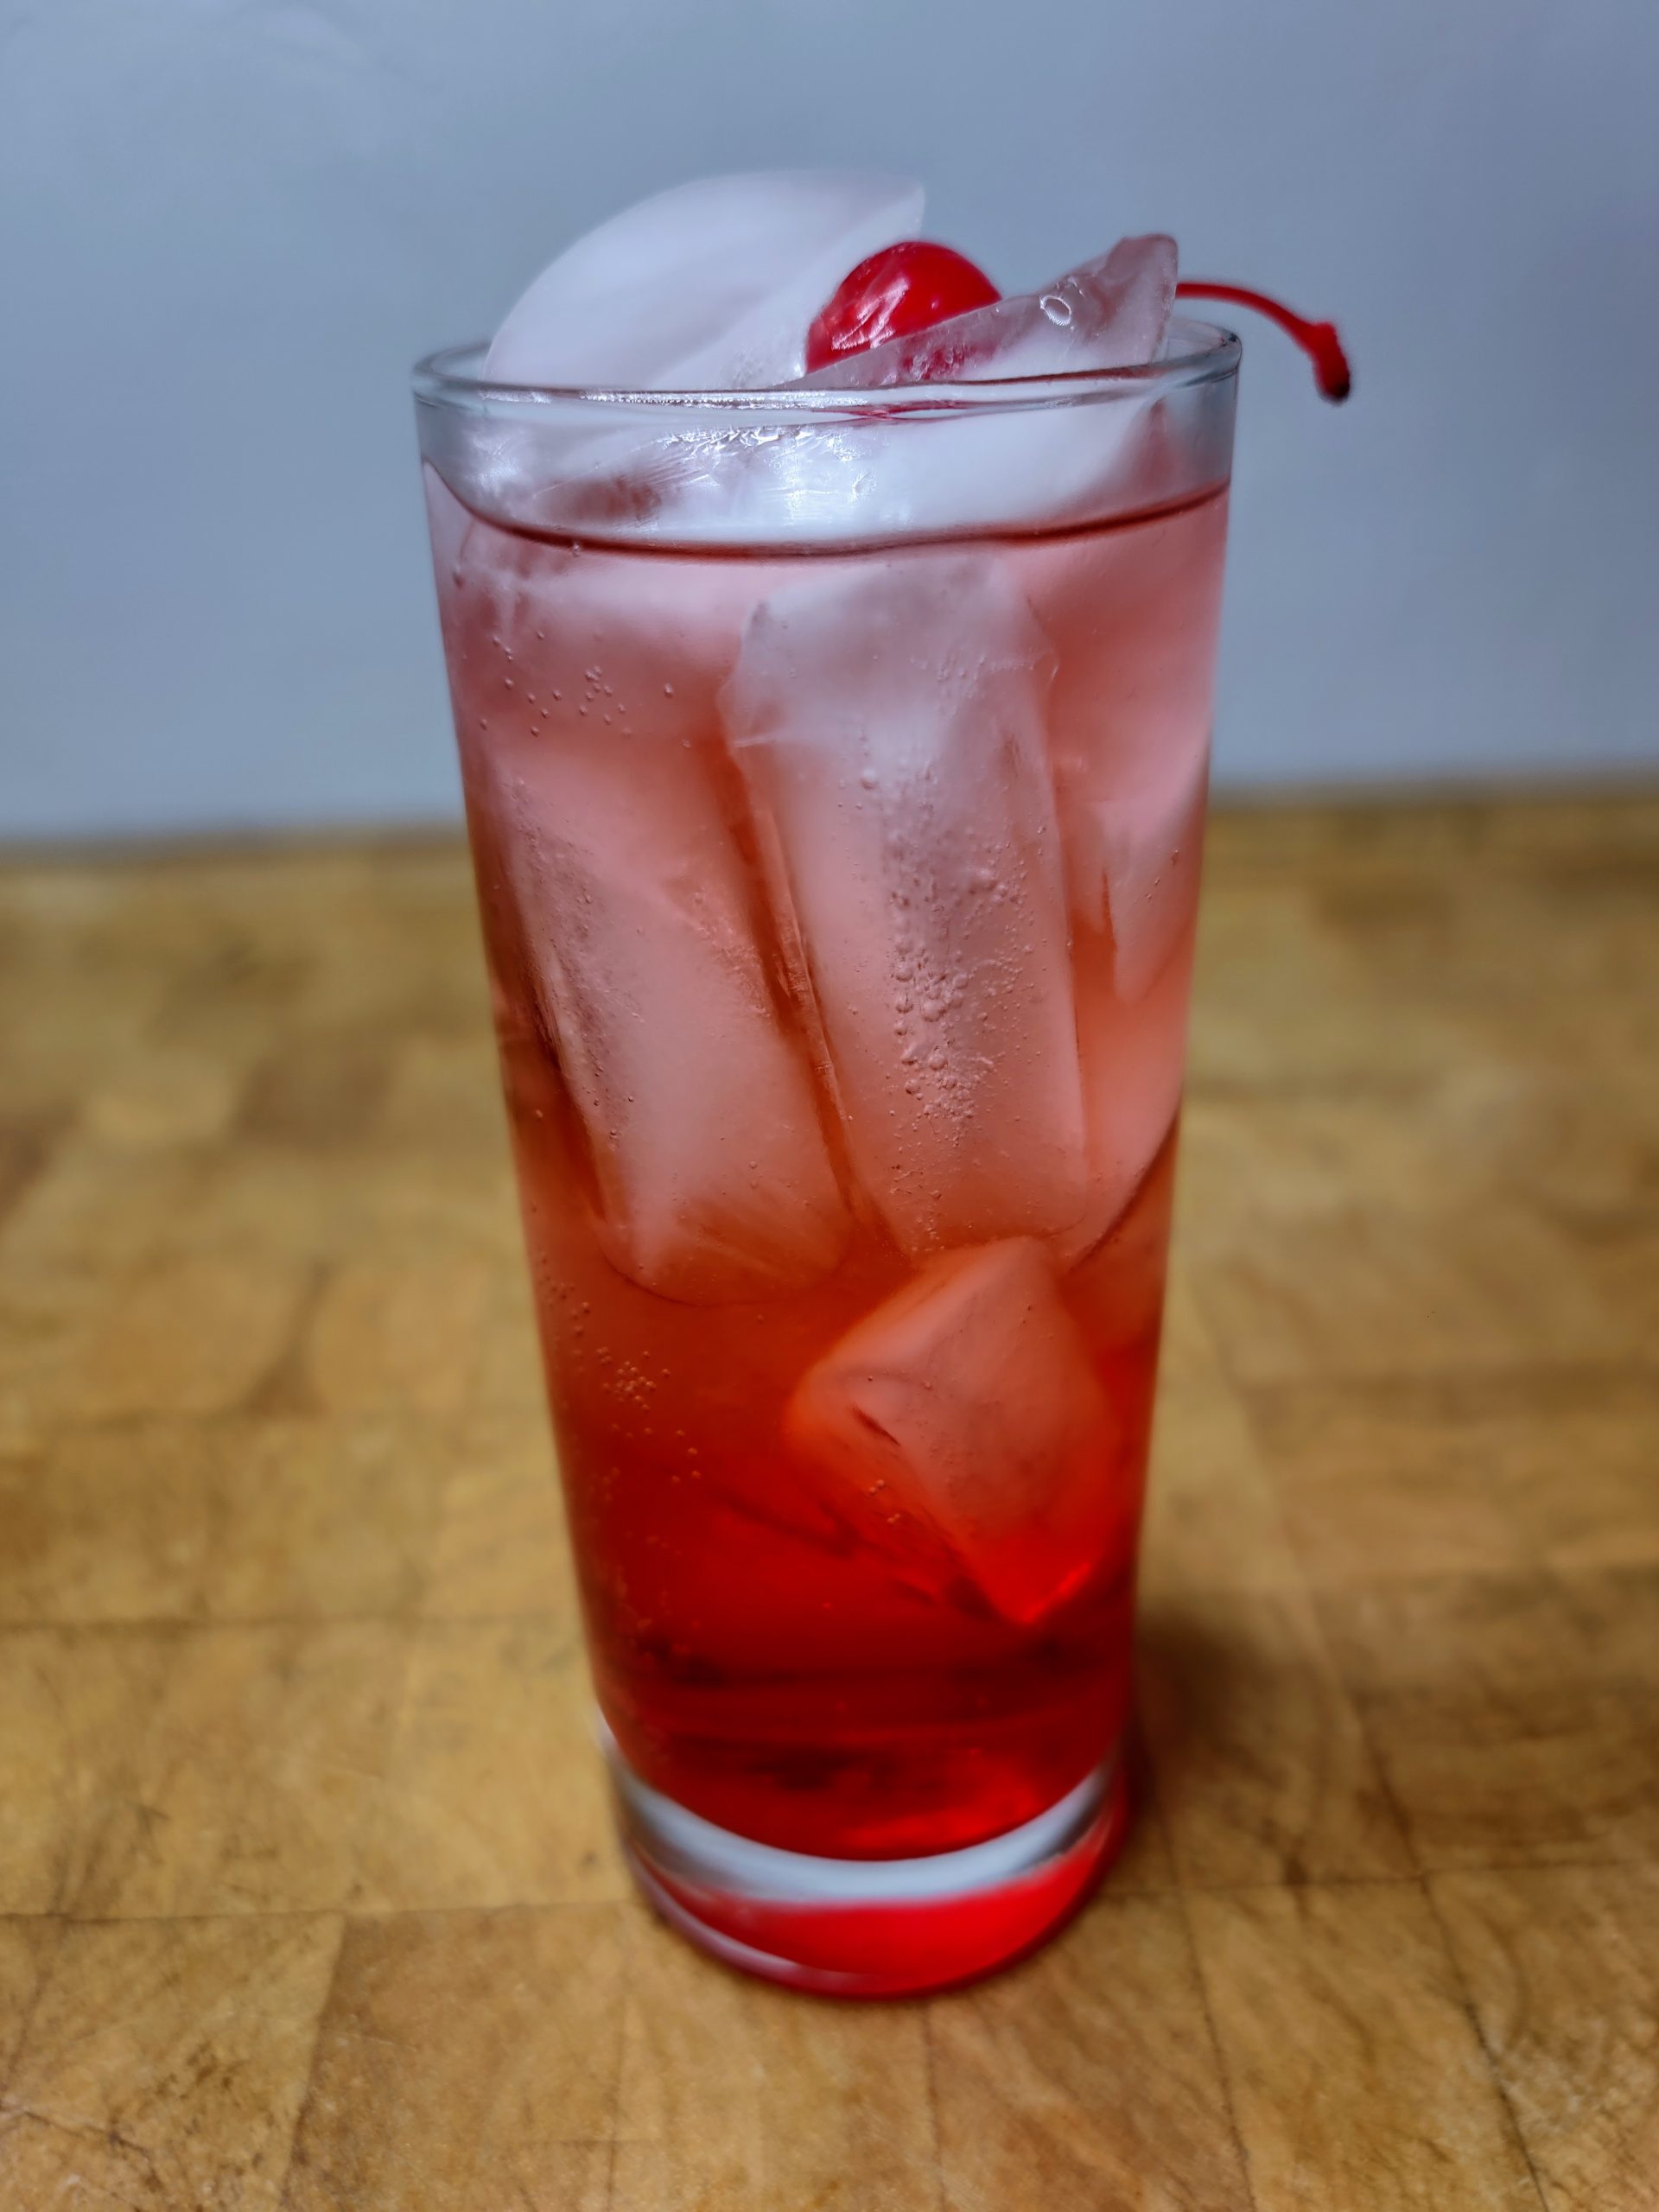 Shirley temple drink in a highball glass topped with a cherry.